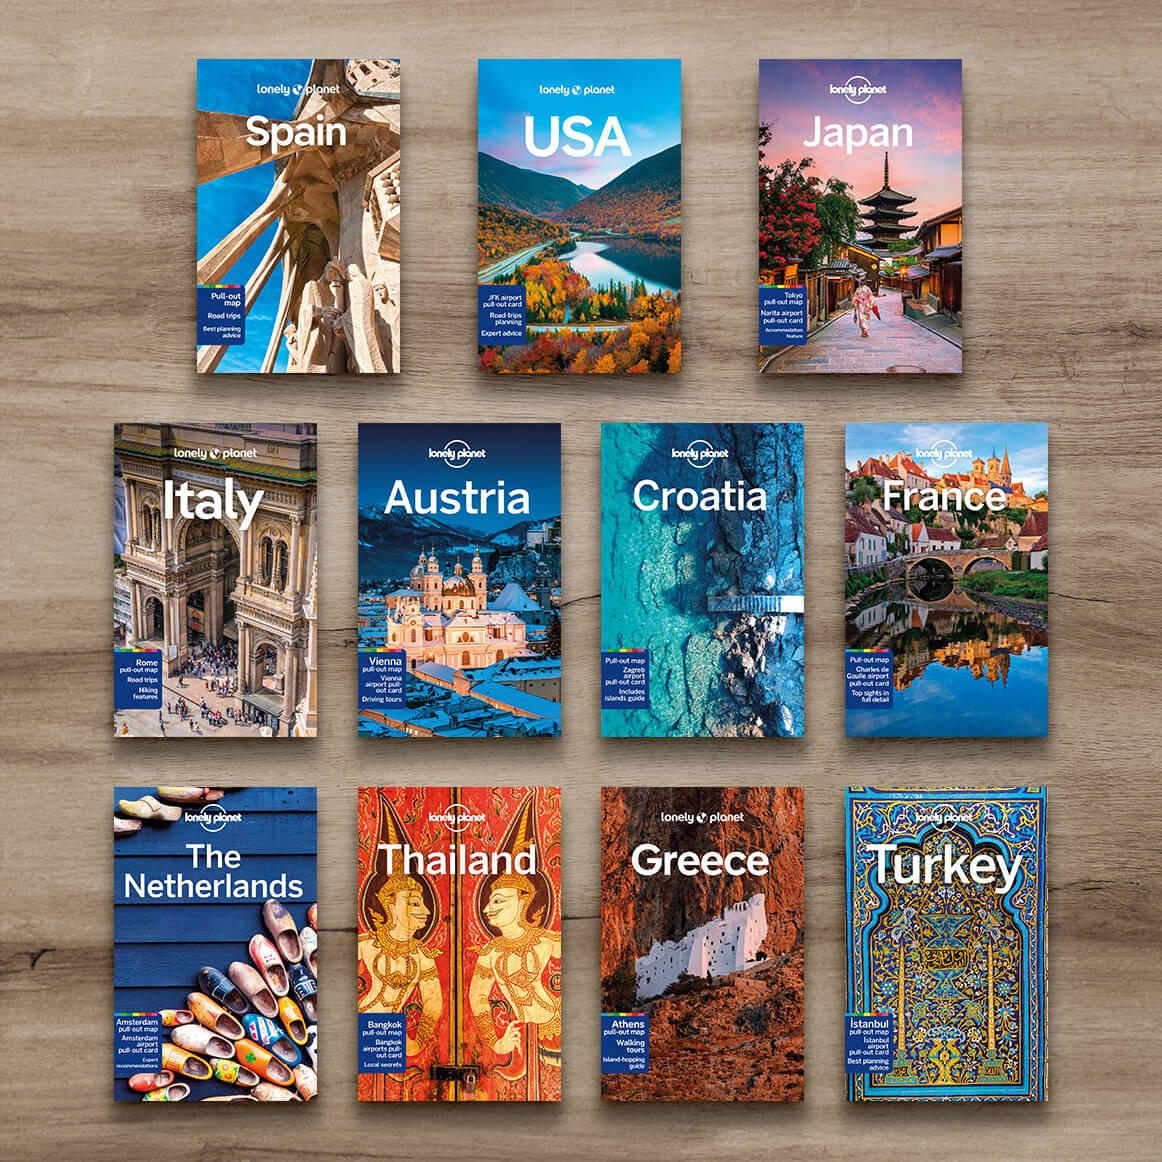 lonelyplanet-overview.jpg